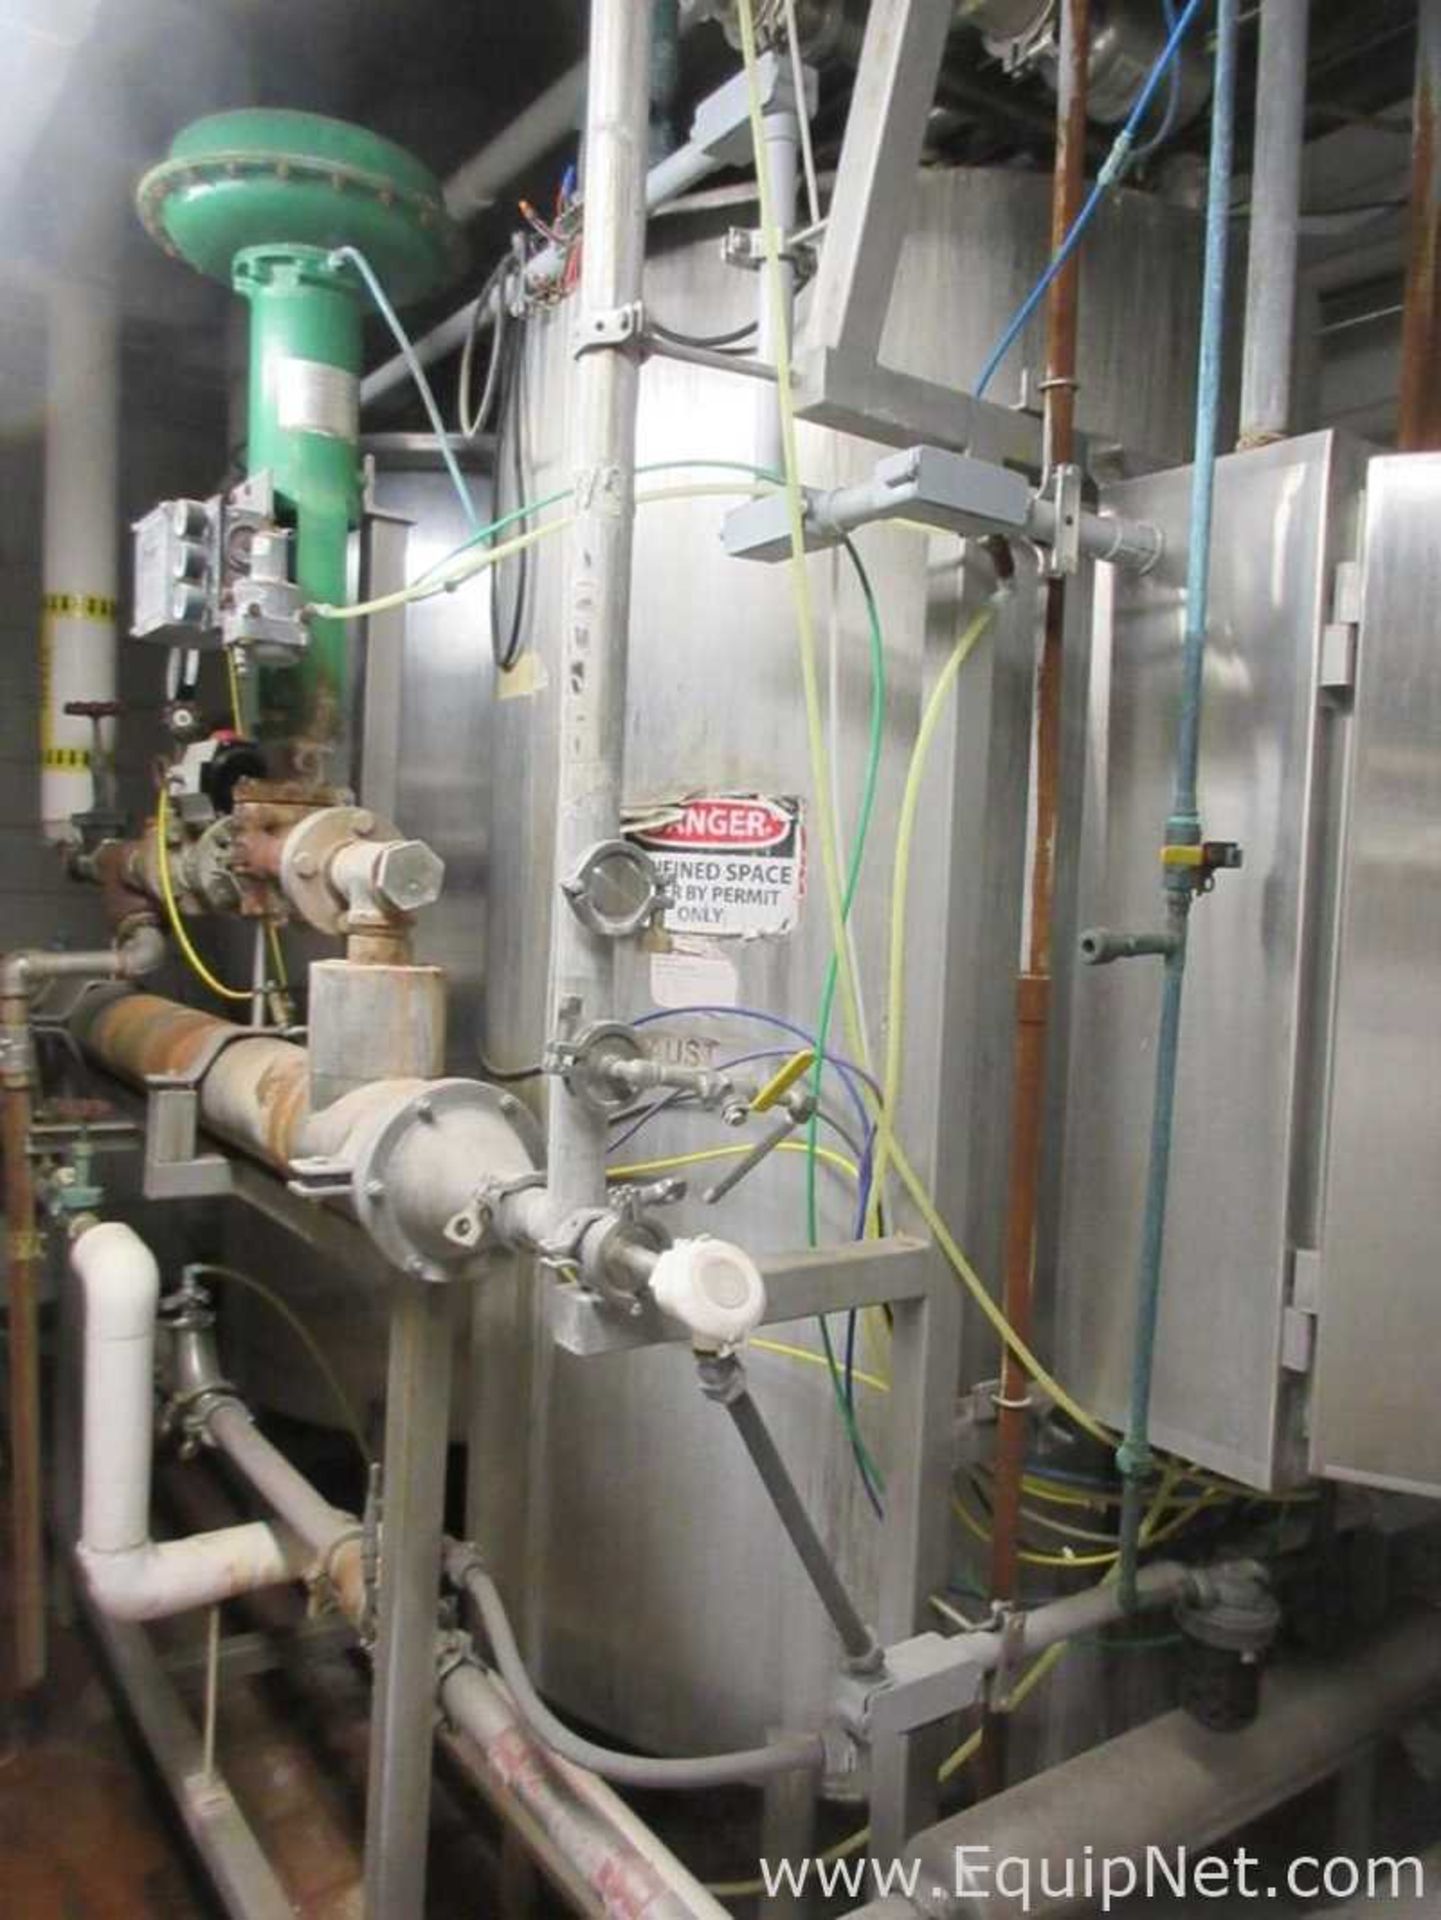 EQUIPNET LISTING #775980; REMOVAL COST: $15,754.00; DESCRIPTION: CIP System With Three Tanks, - Image 6 of 17